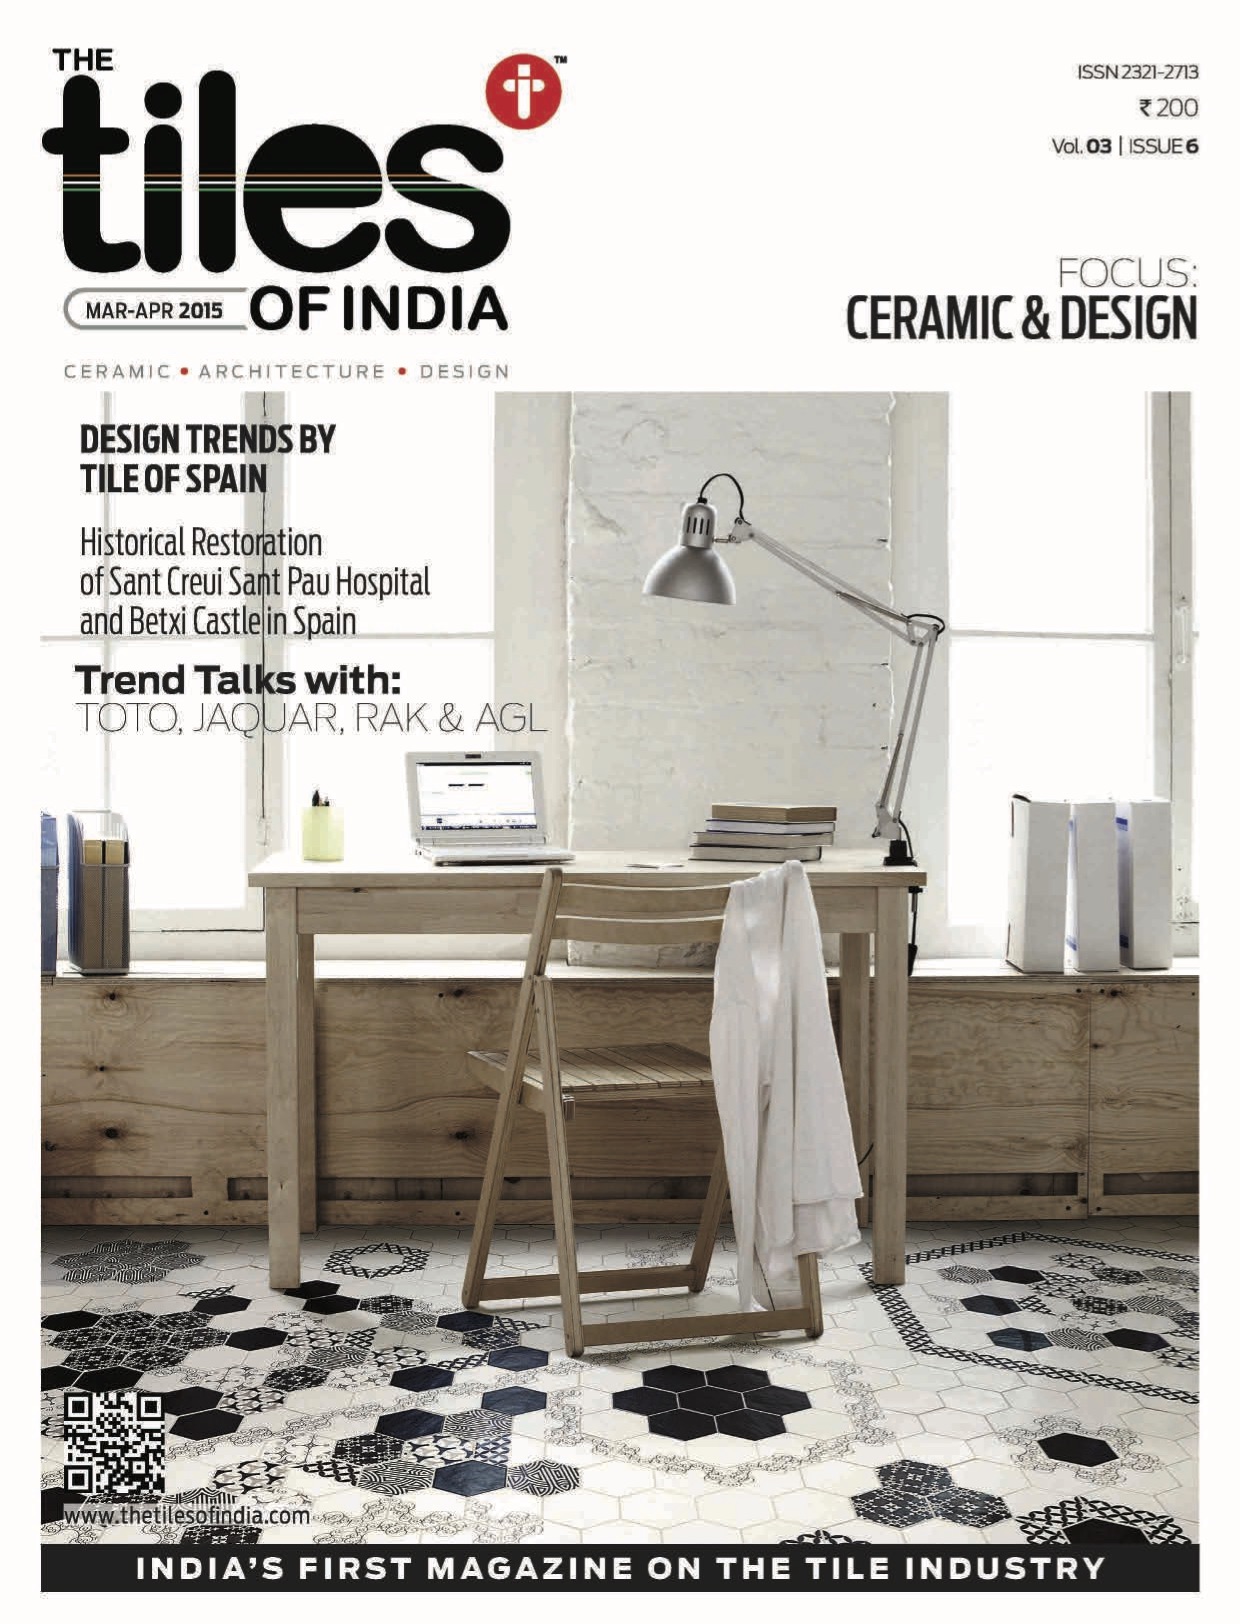 The Tiles of India Magazine - Mar Apr 2015 Issue